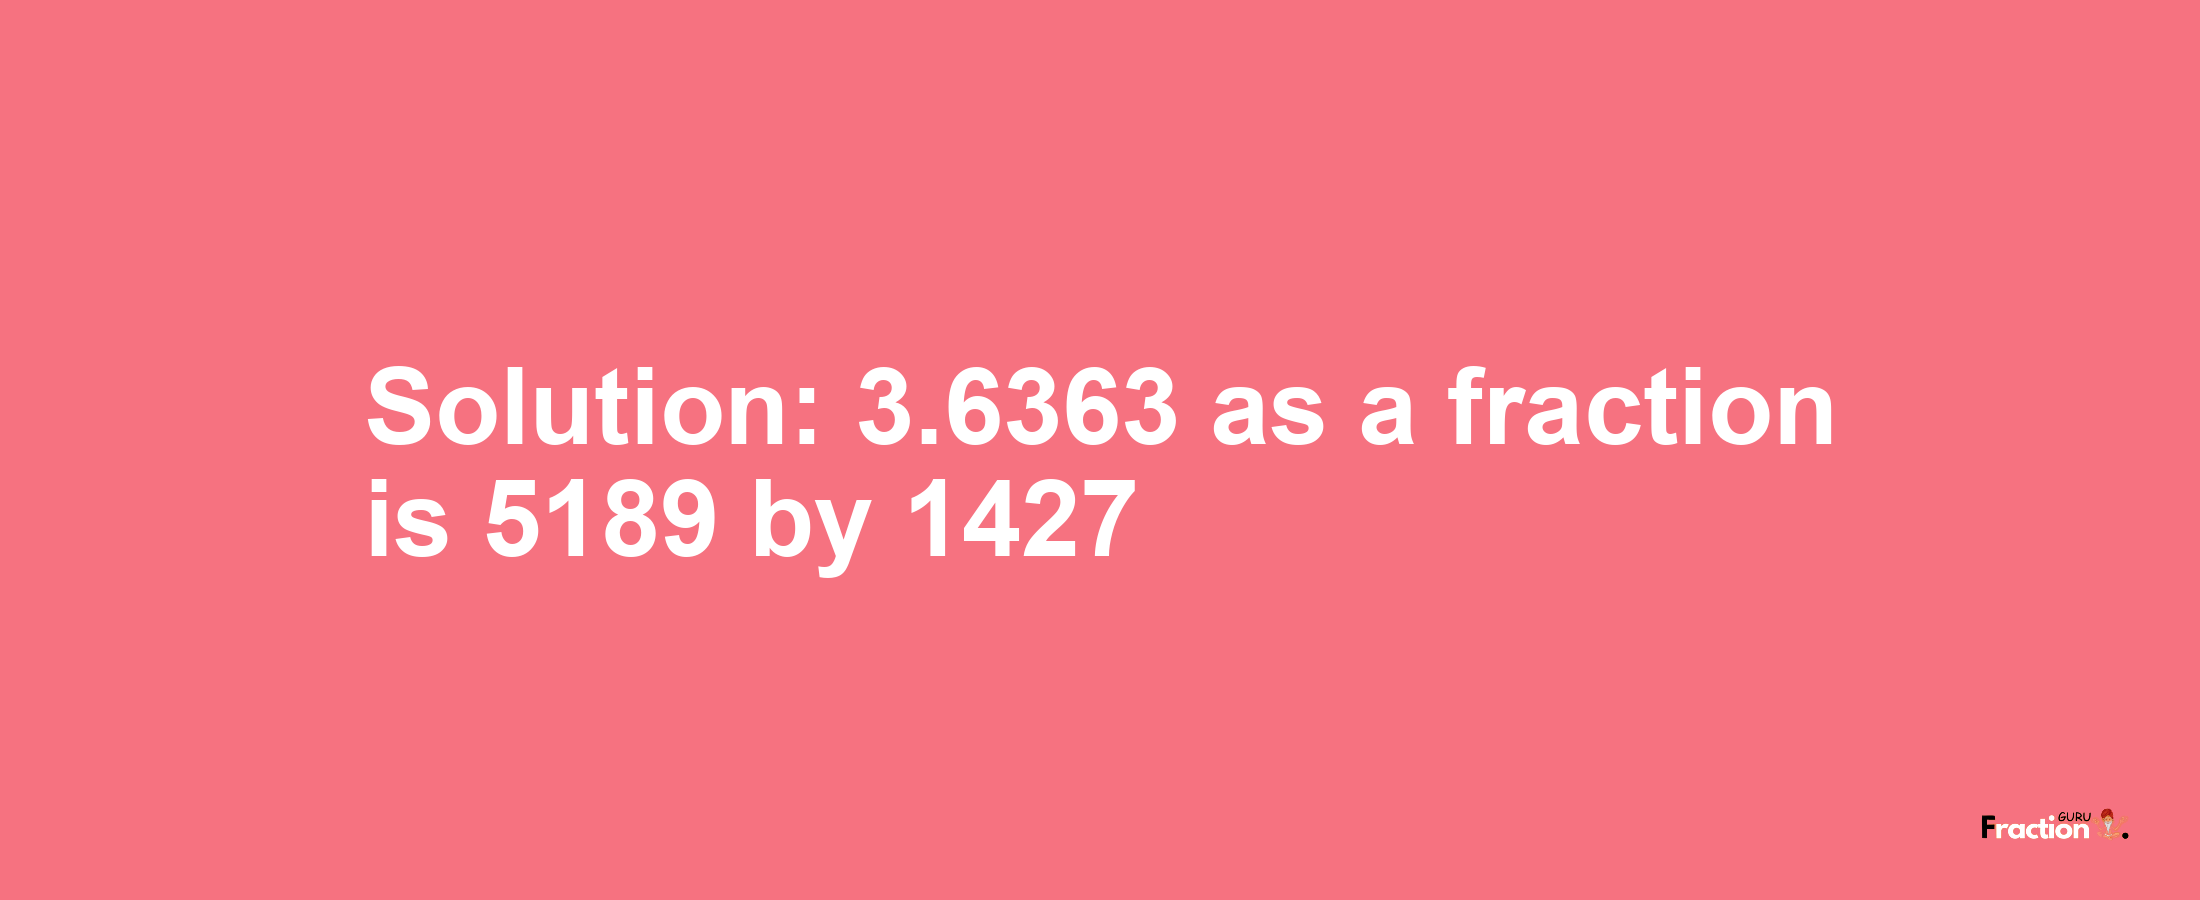 Solution:3.6363 as a fraction is 5189/1427